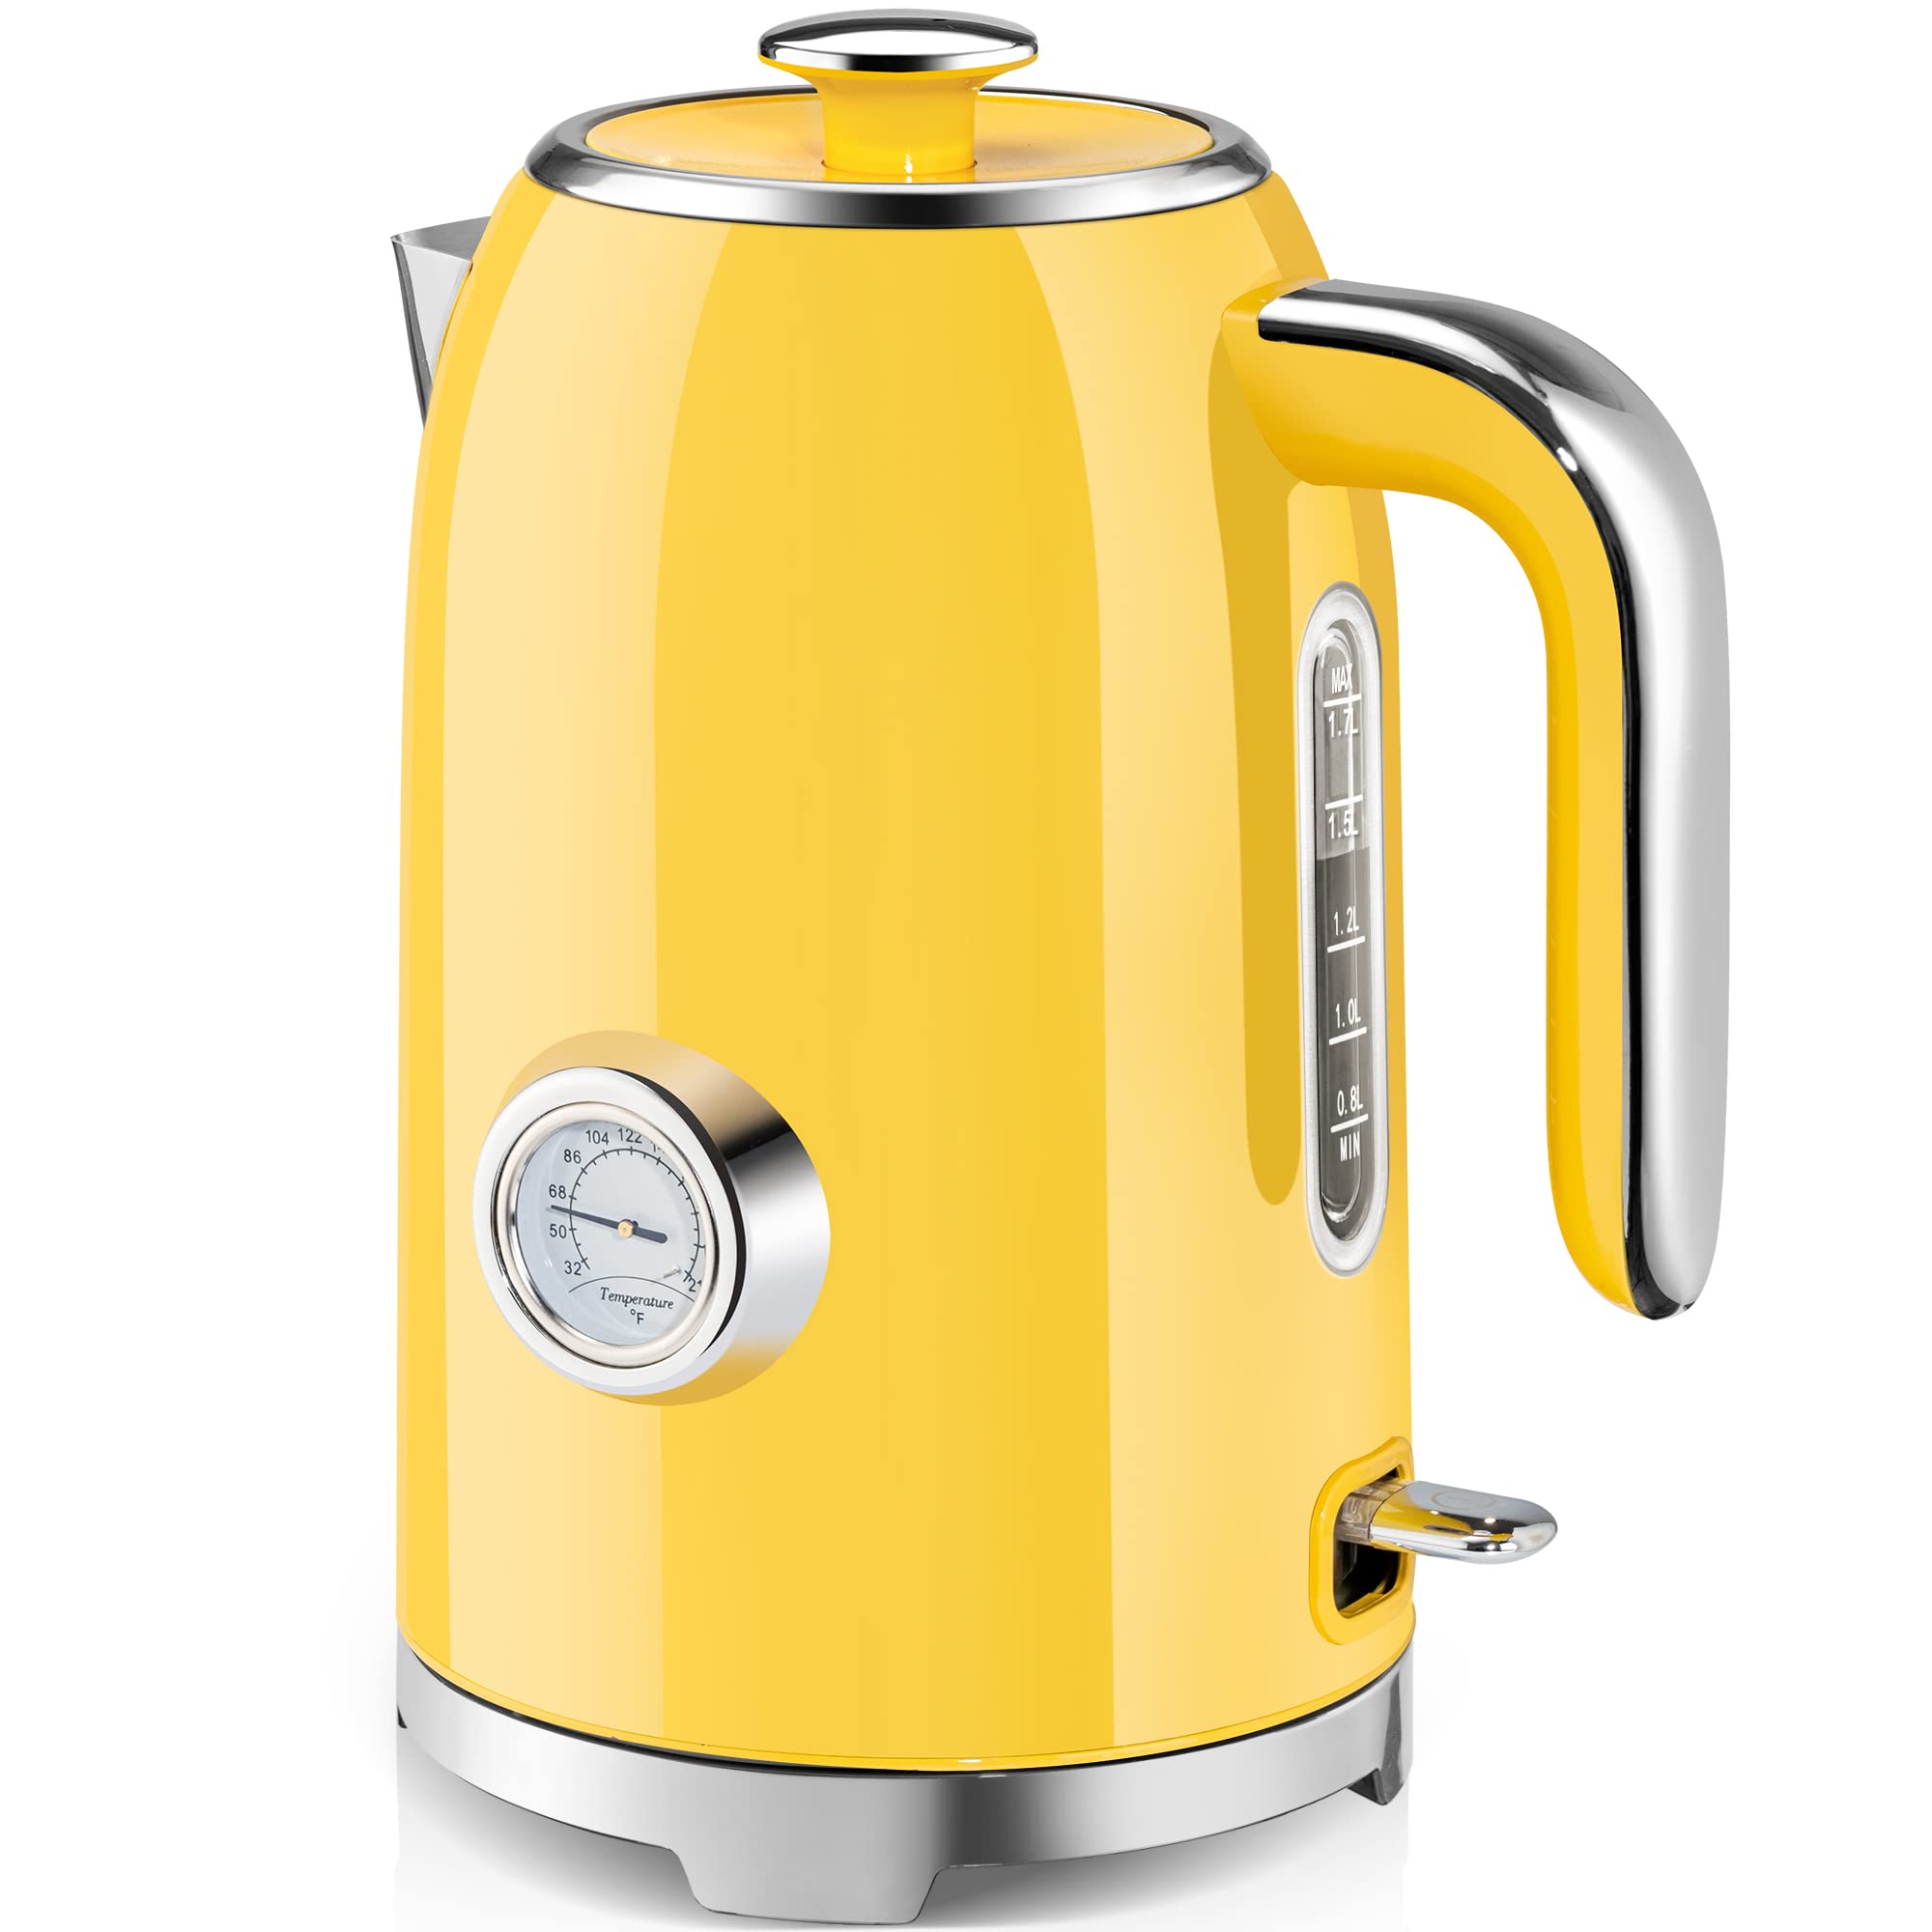 Yellow Plastic Electric Kettle Coffee Cups Stock Illustration 2261320295